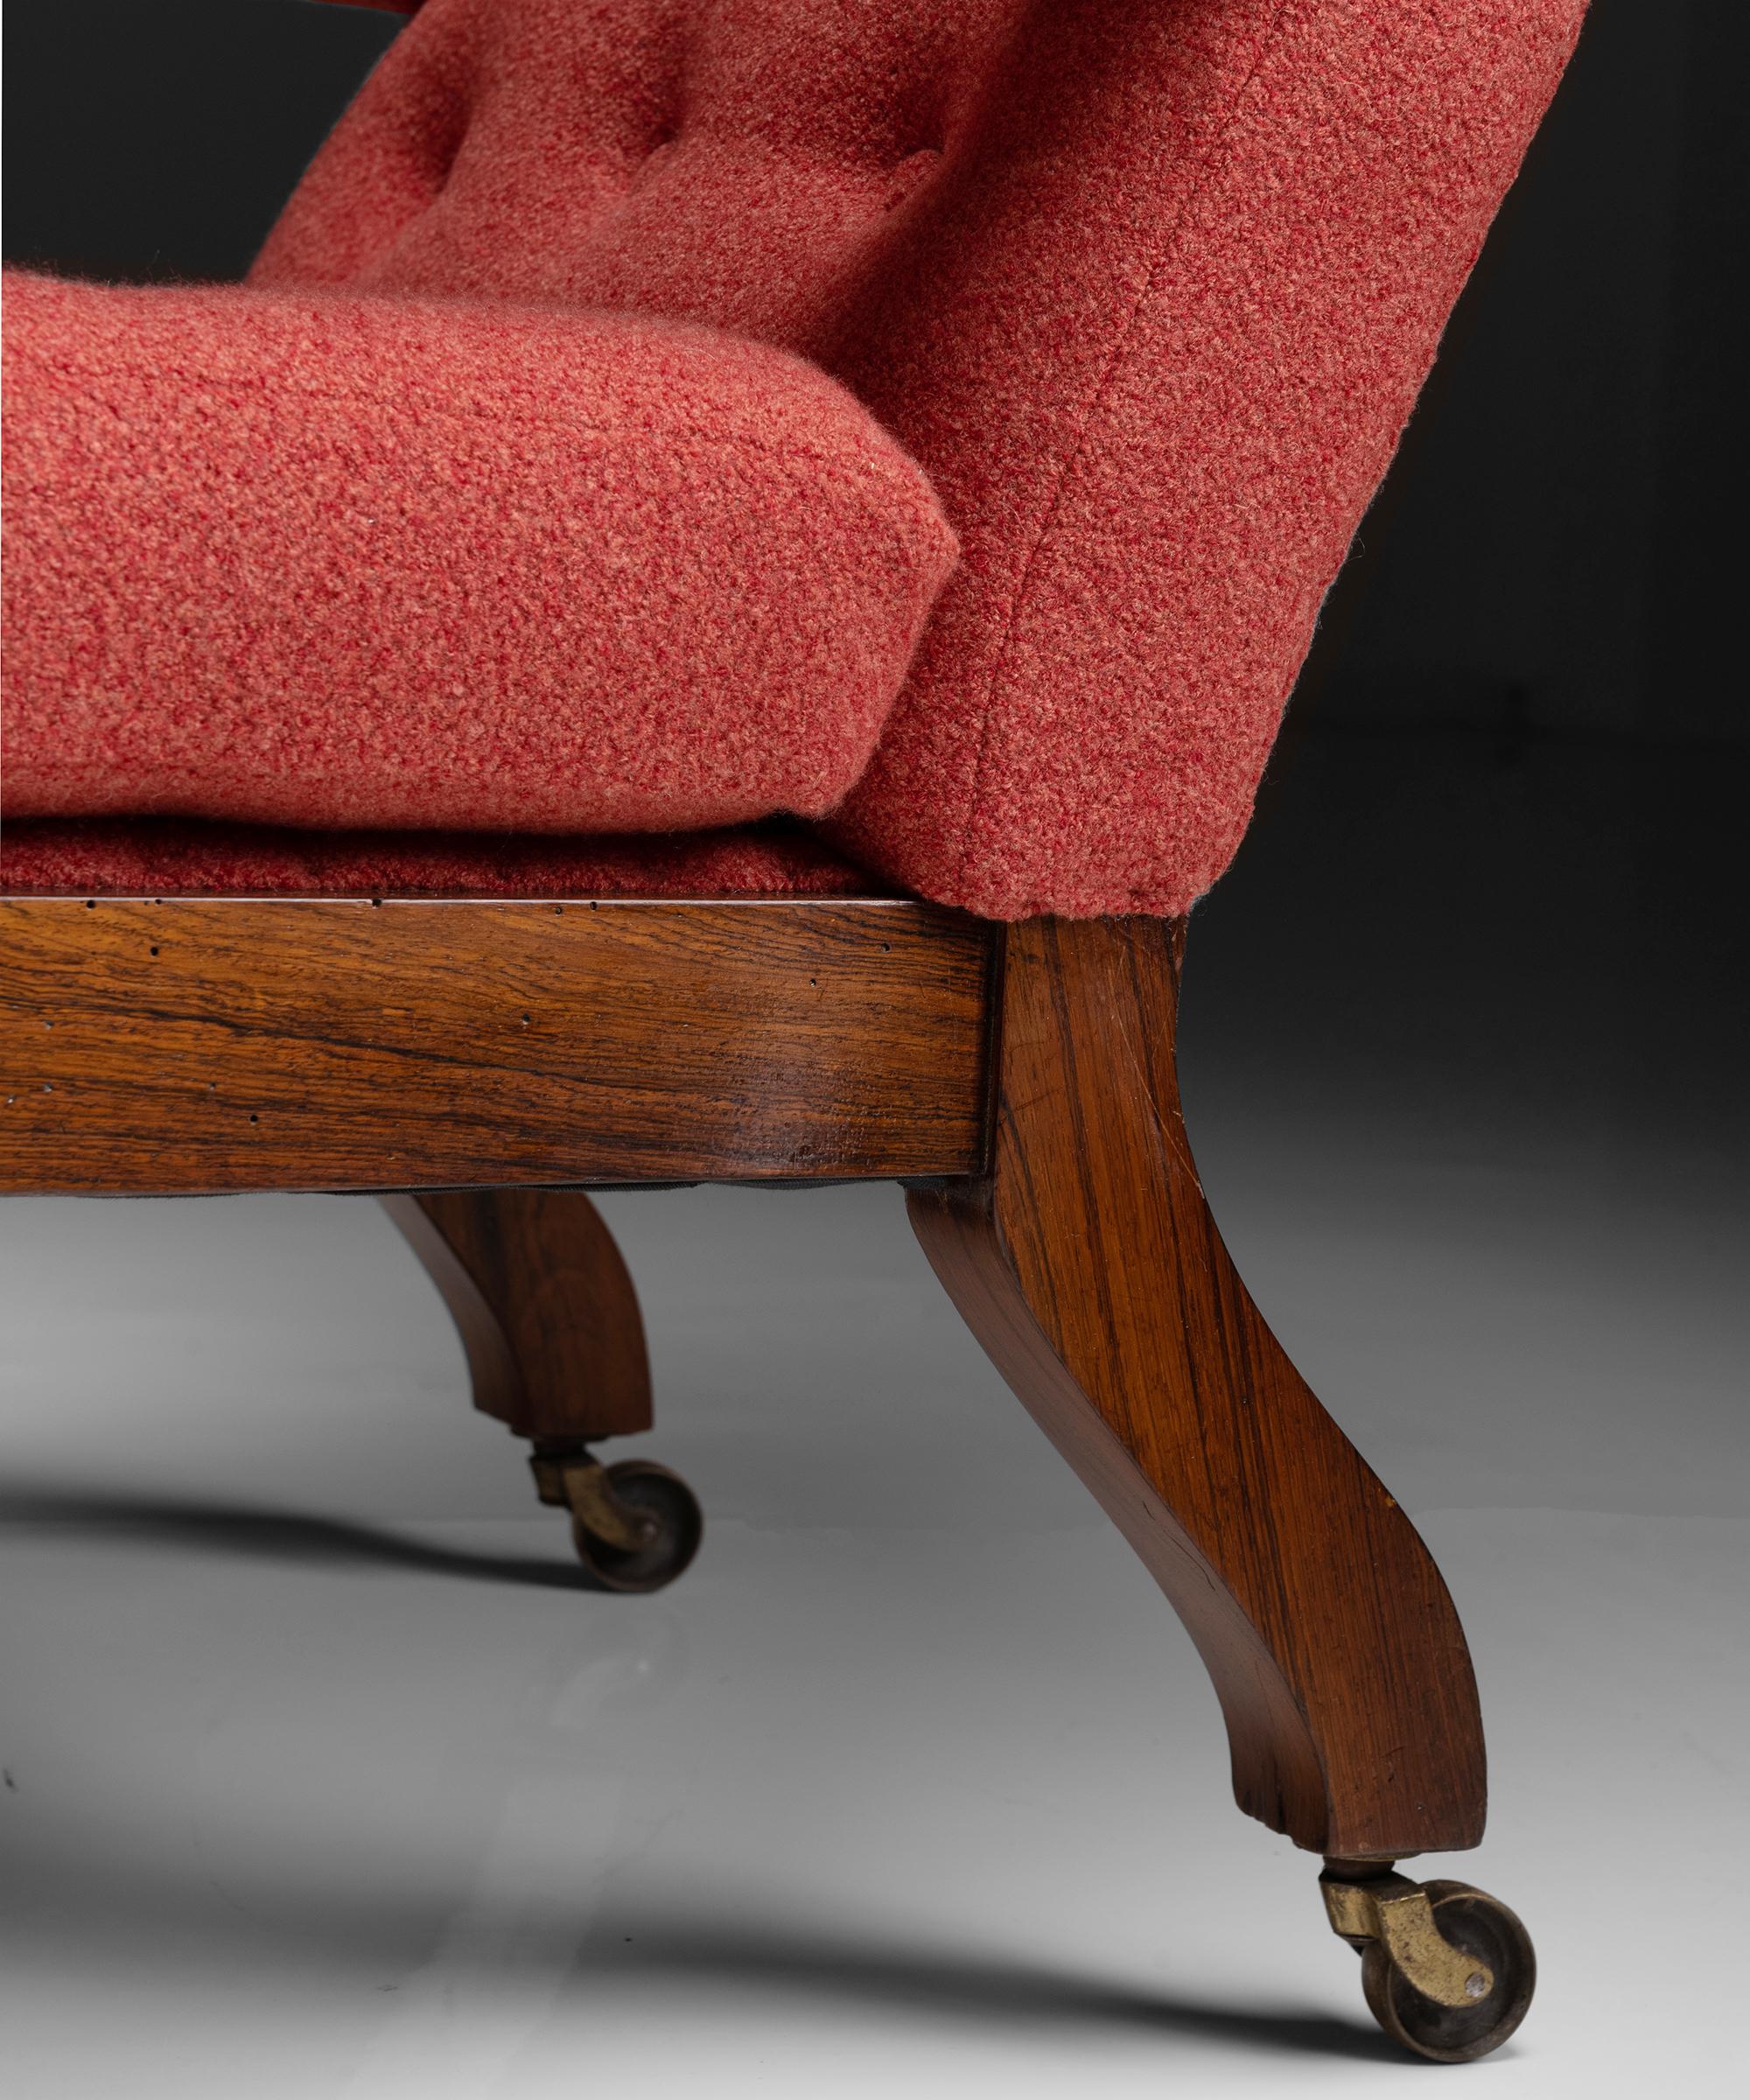 English Library Armchairs in Textured Wool by Holland & Sherry, England, circa 1890